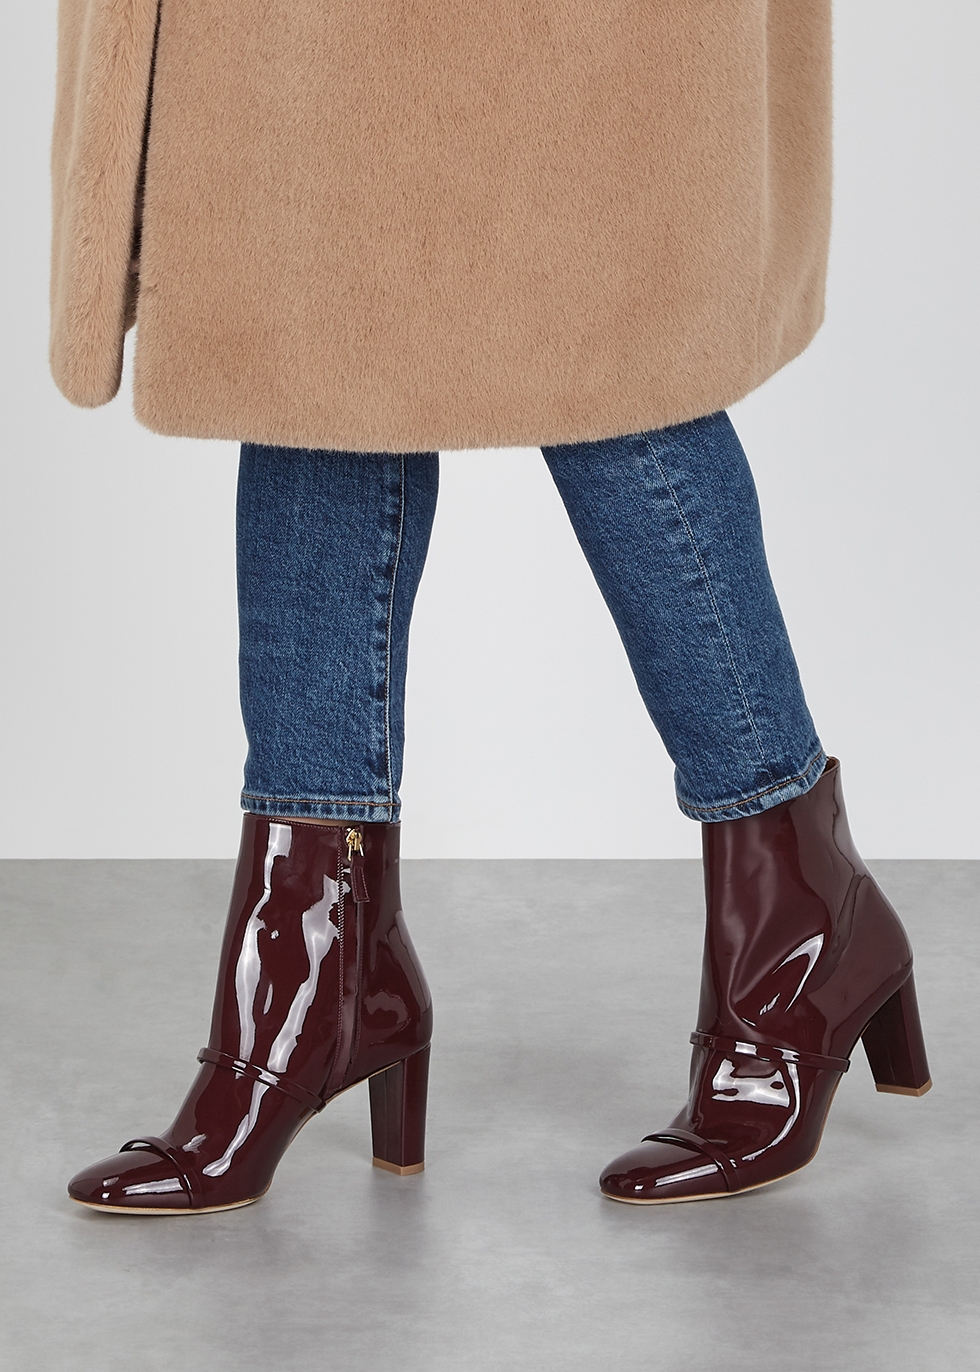 patent burgundy ankle boots